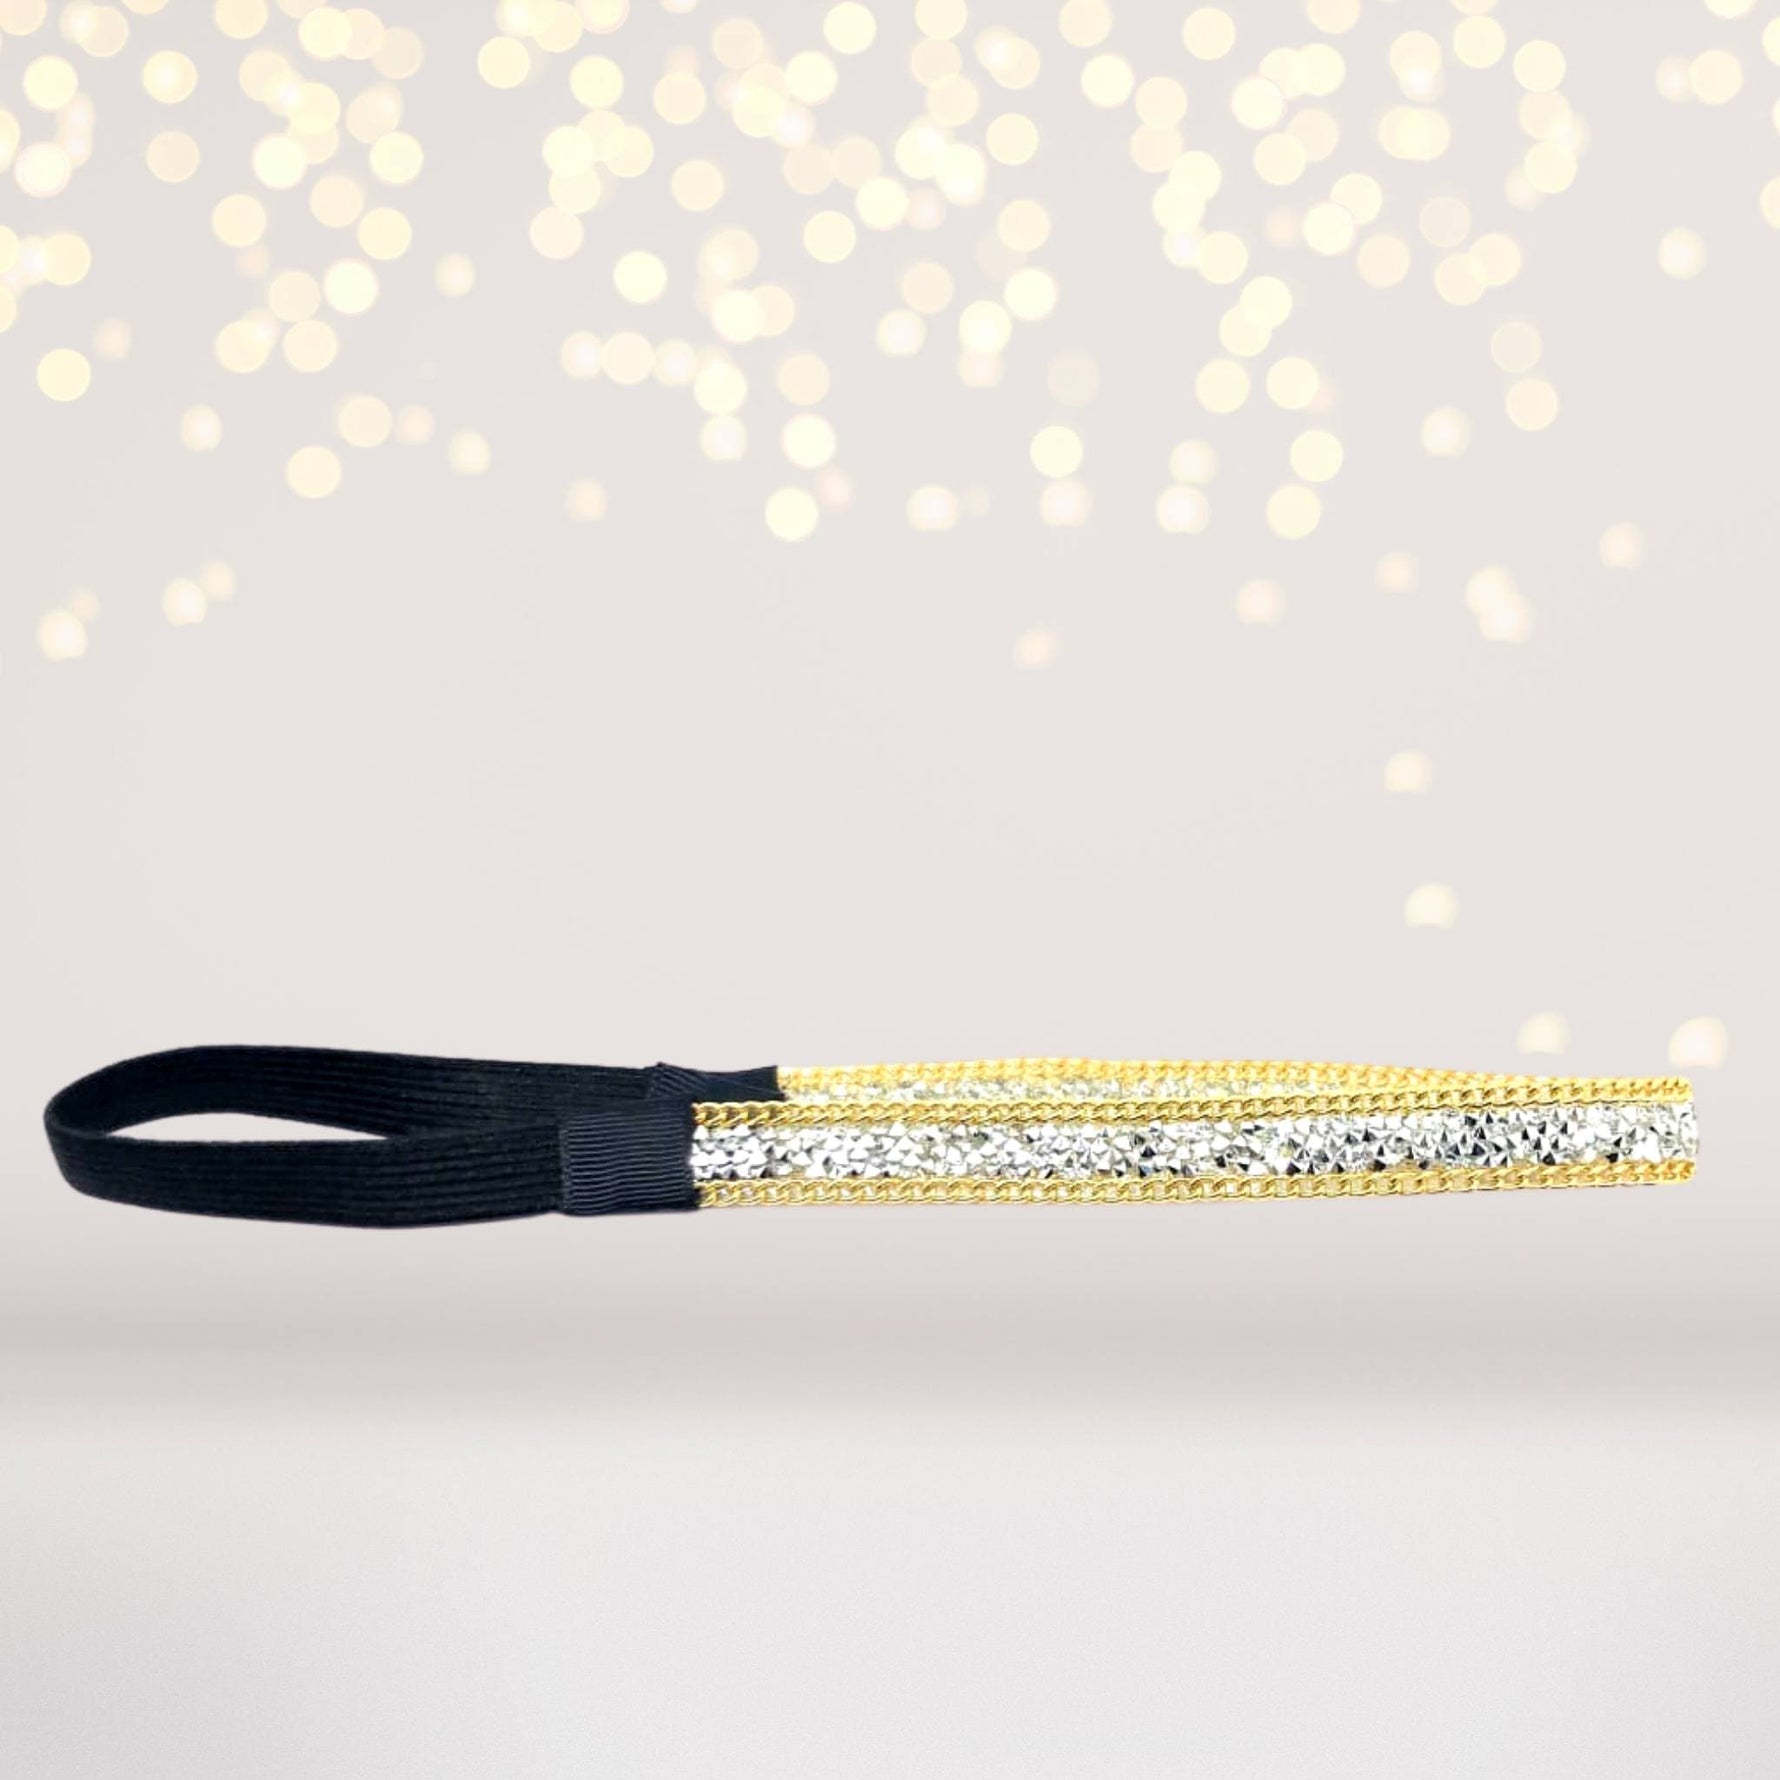 Glitter and Gold Sparkles Holiday Headbands